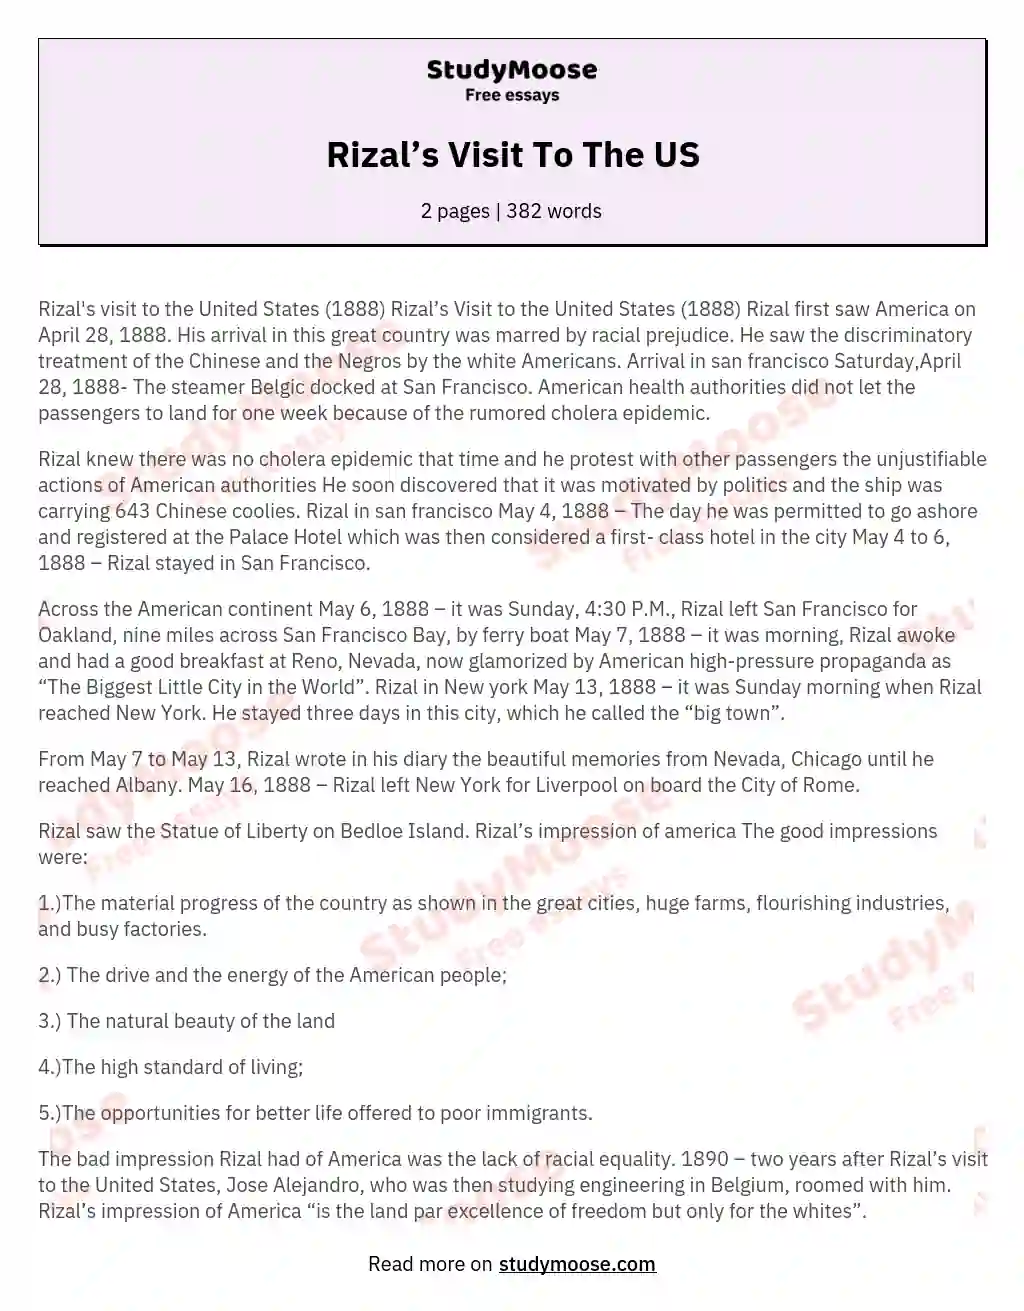 Rizal’s Visit To The US essay